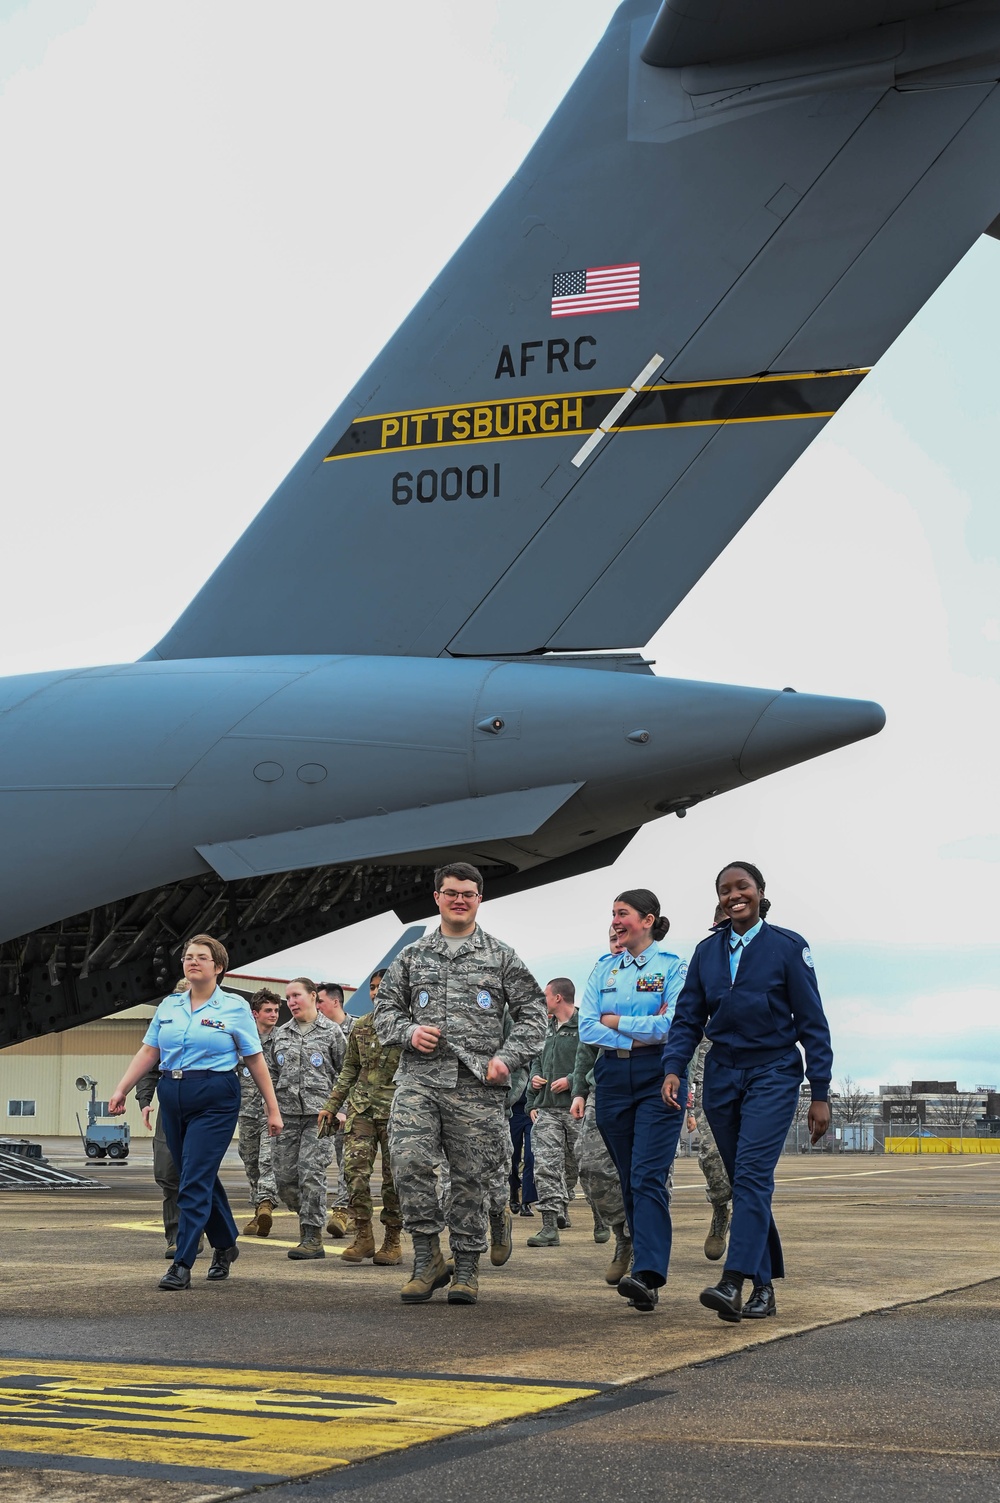 The sky is not the limit: Pine-Richland High School JROTC attends orientation flight at Pittsburgh IAP ARS